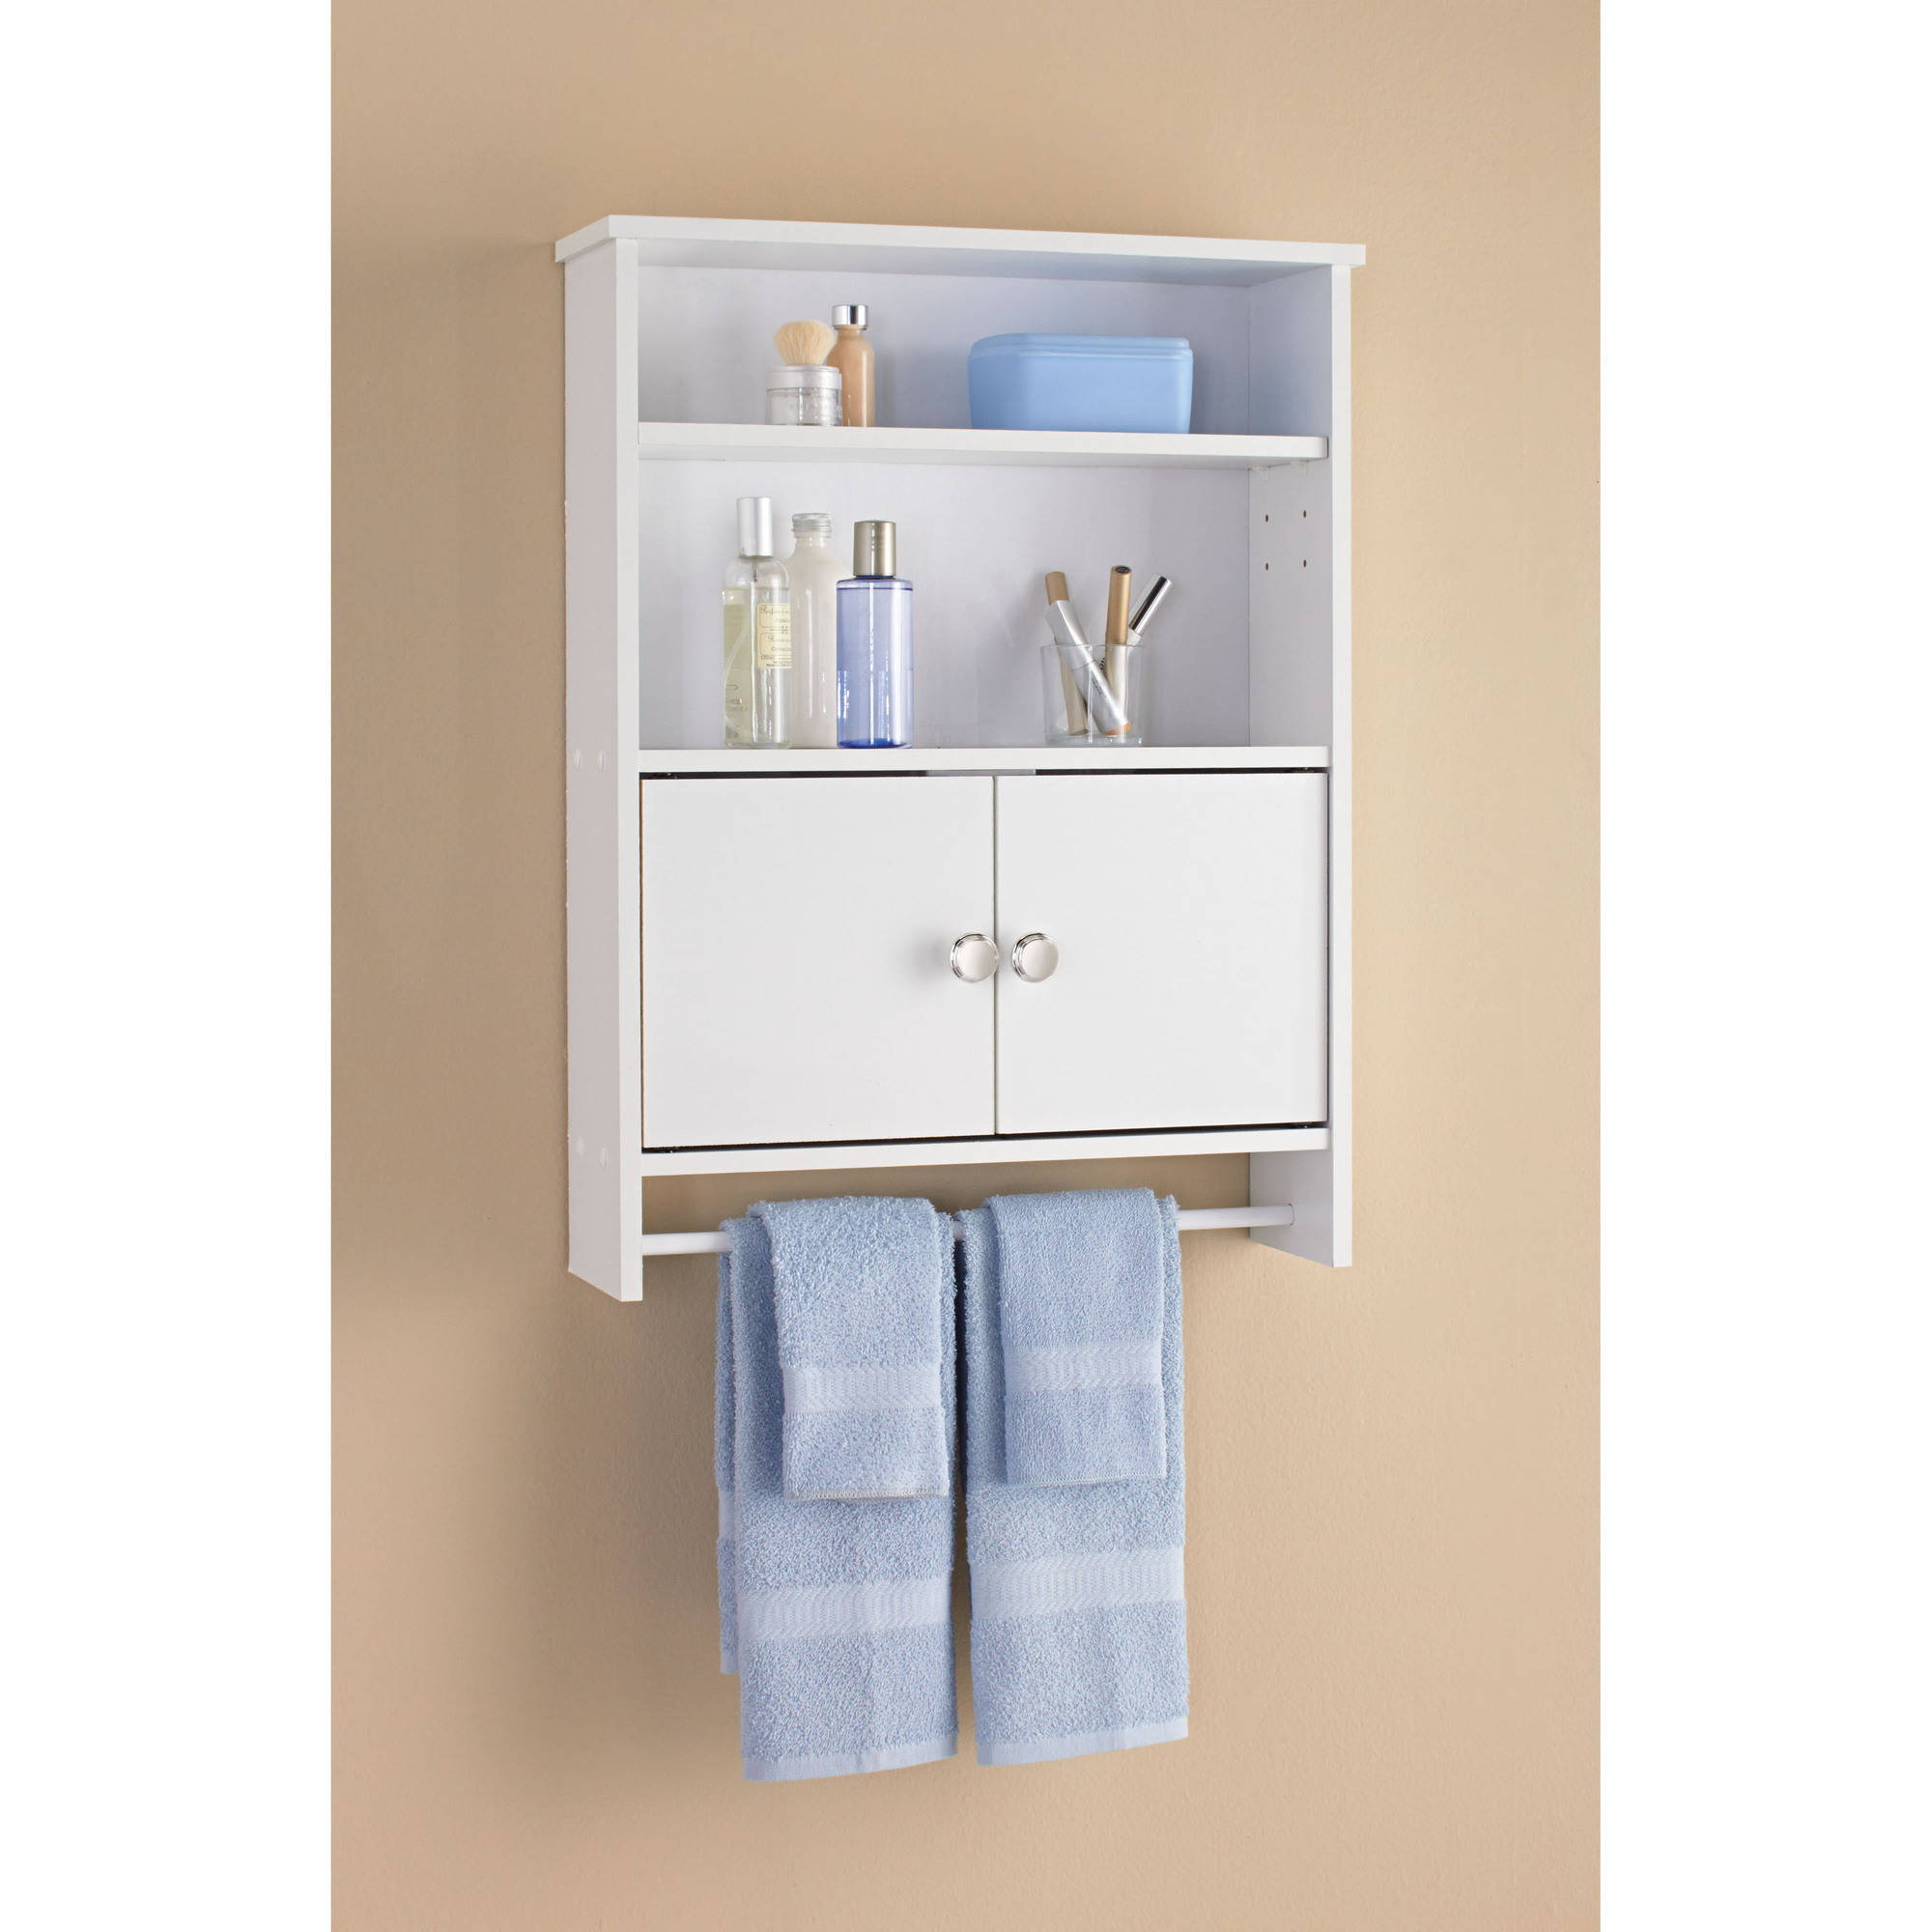 Mainstays 2 Door Bathroom Wall Cabinet White Walmart throughout proportions 2000 X 2000